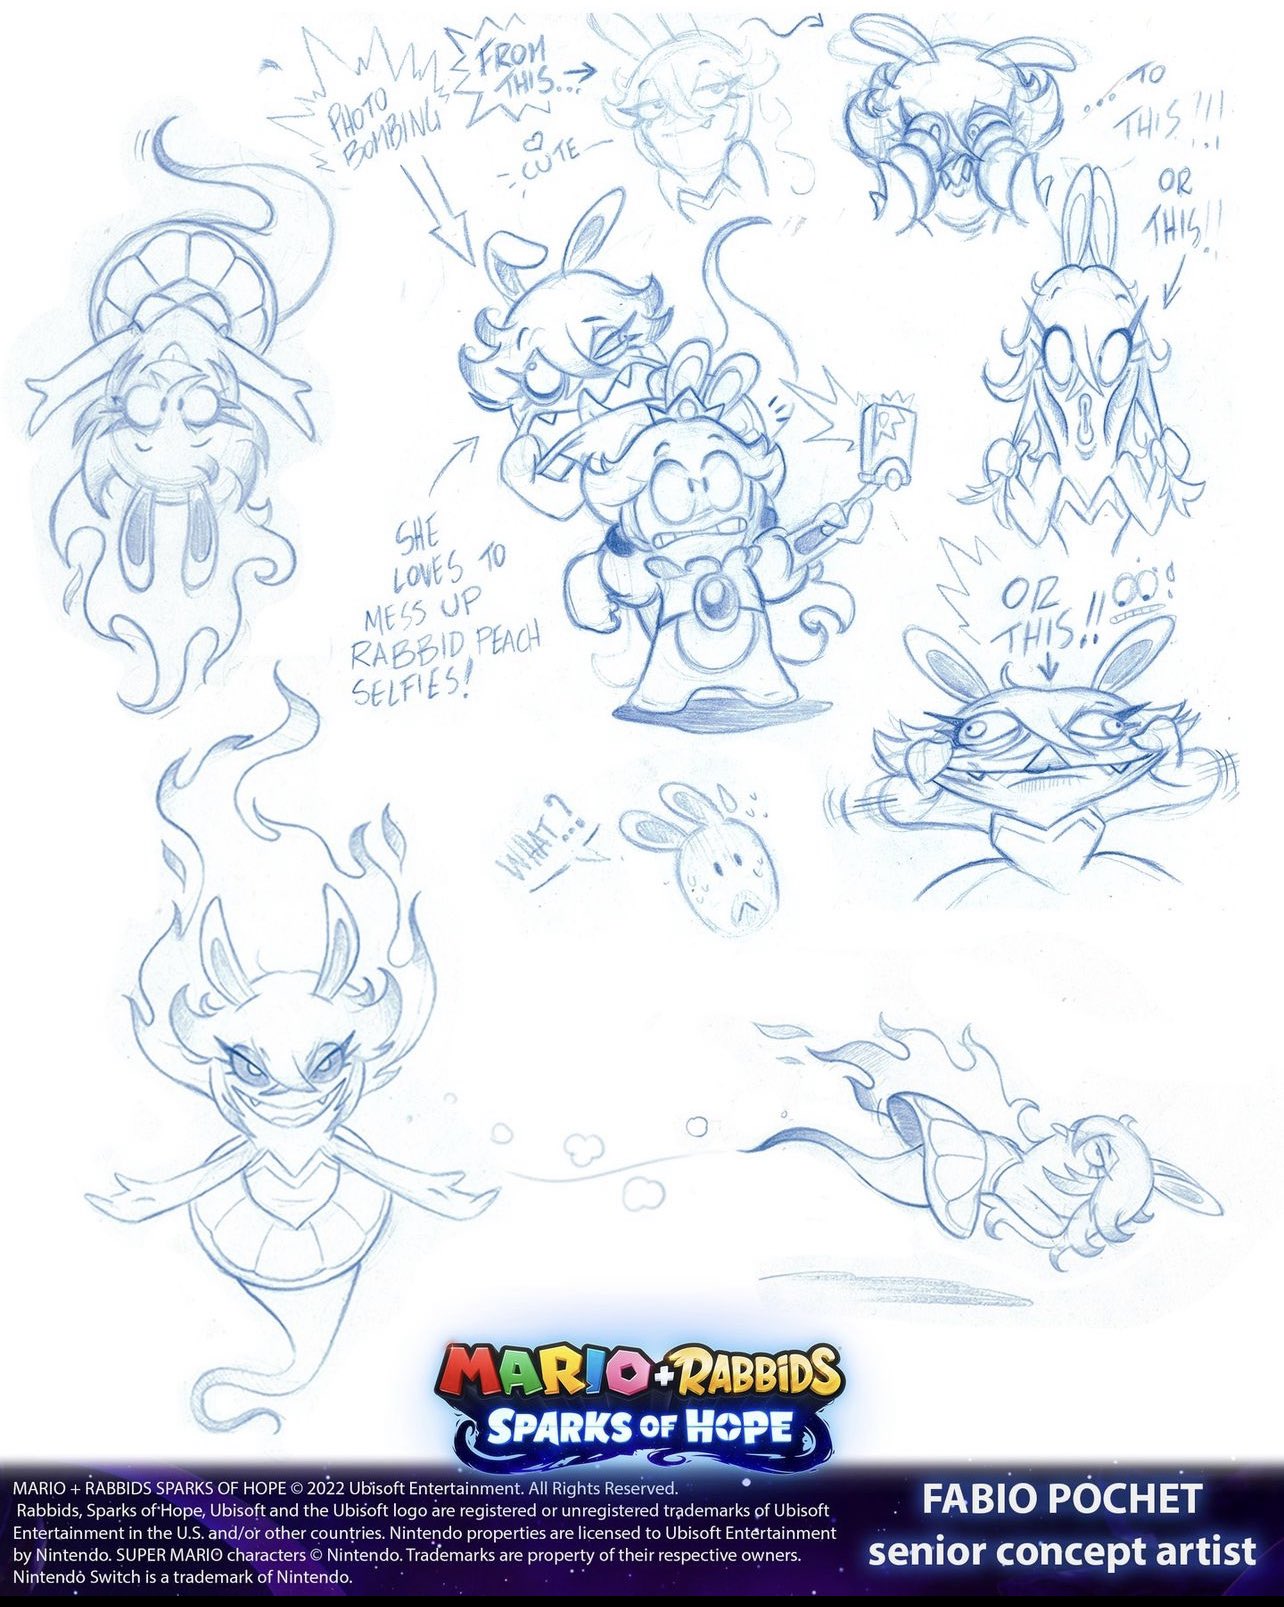 Concept art sketches of Midnite in Mario + Rabbids Sparks of Hope, drawn by Fabio Pochet